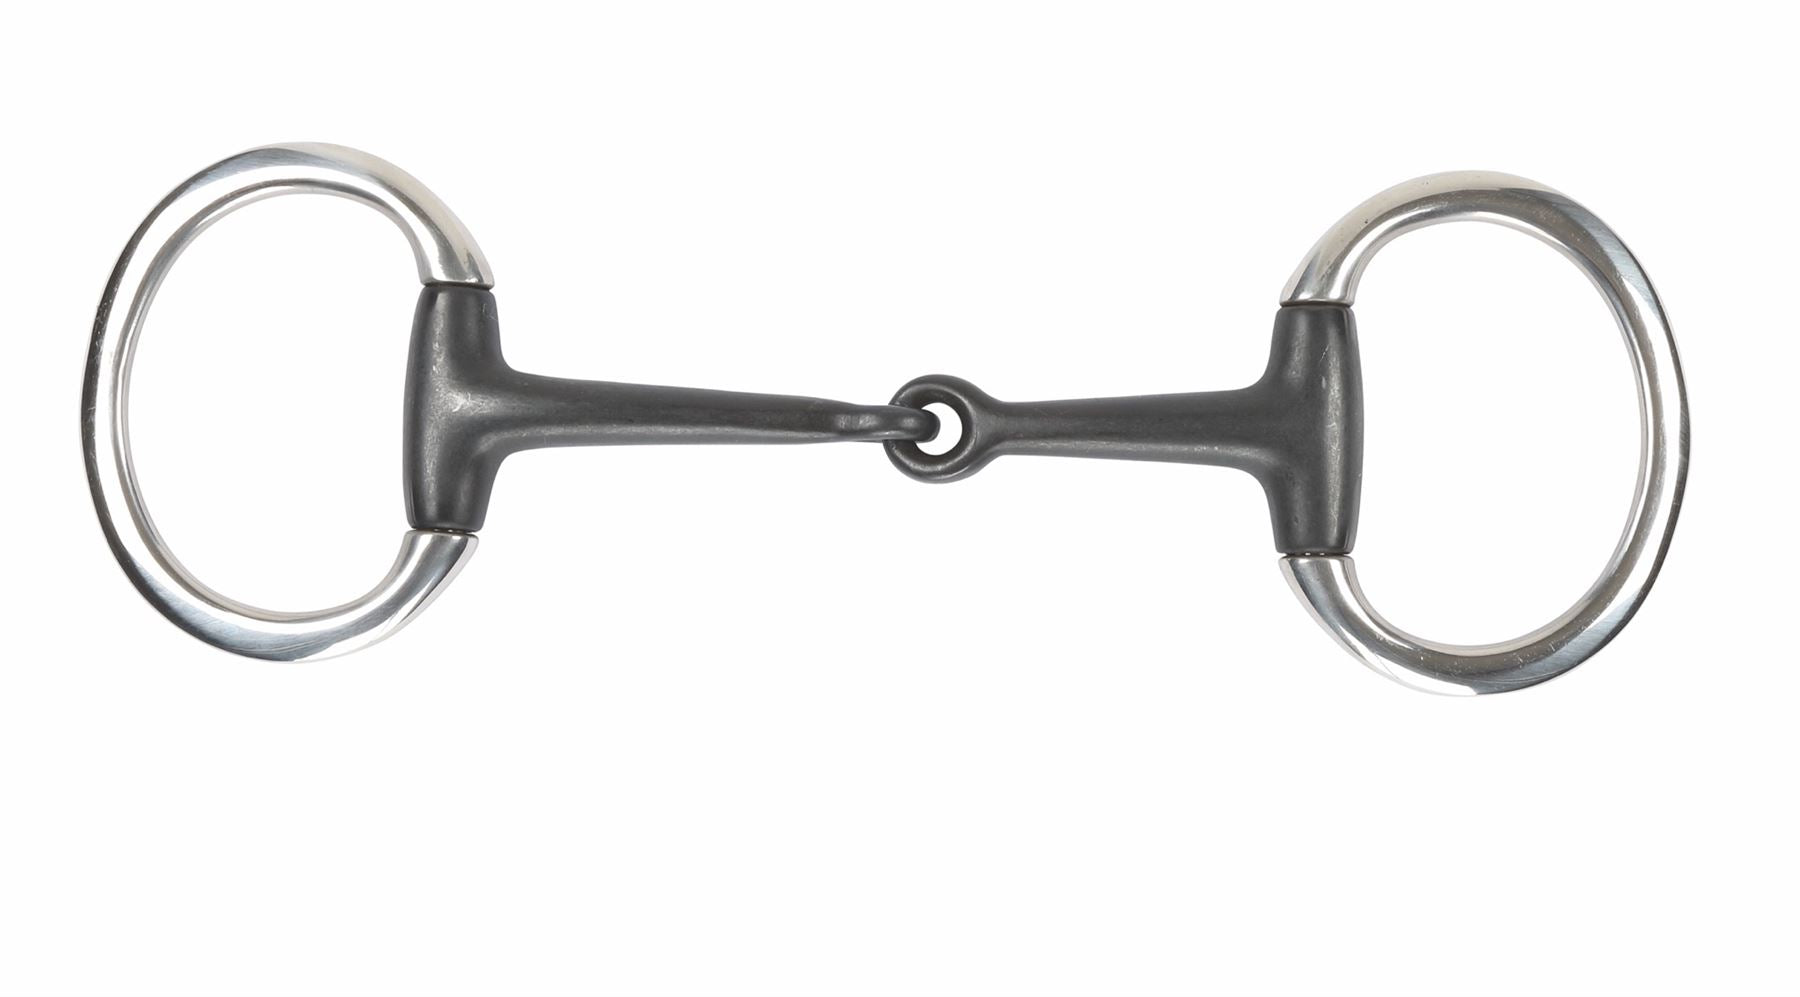 Shires Sweet Iron Flat Ring Eggbutt Snaffle - Just Horse Riders